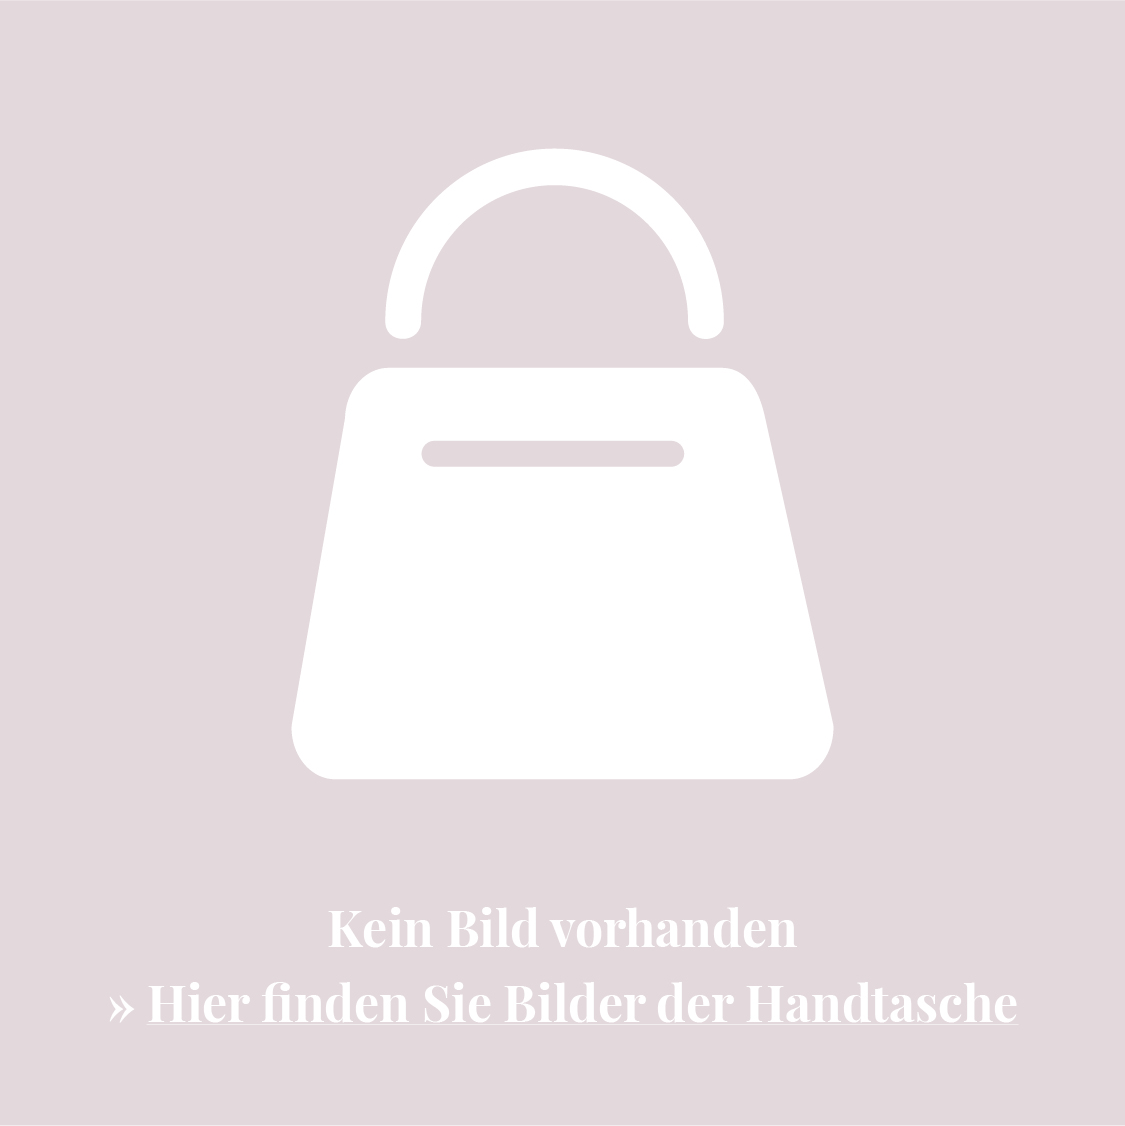 Christian Dior Pre-Owned 2006 pe-owned Lovely Handtasche mit Trotter-Muster - Schwarz von Christian Dior